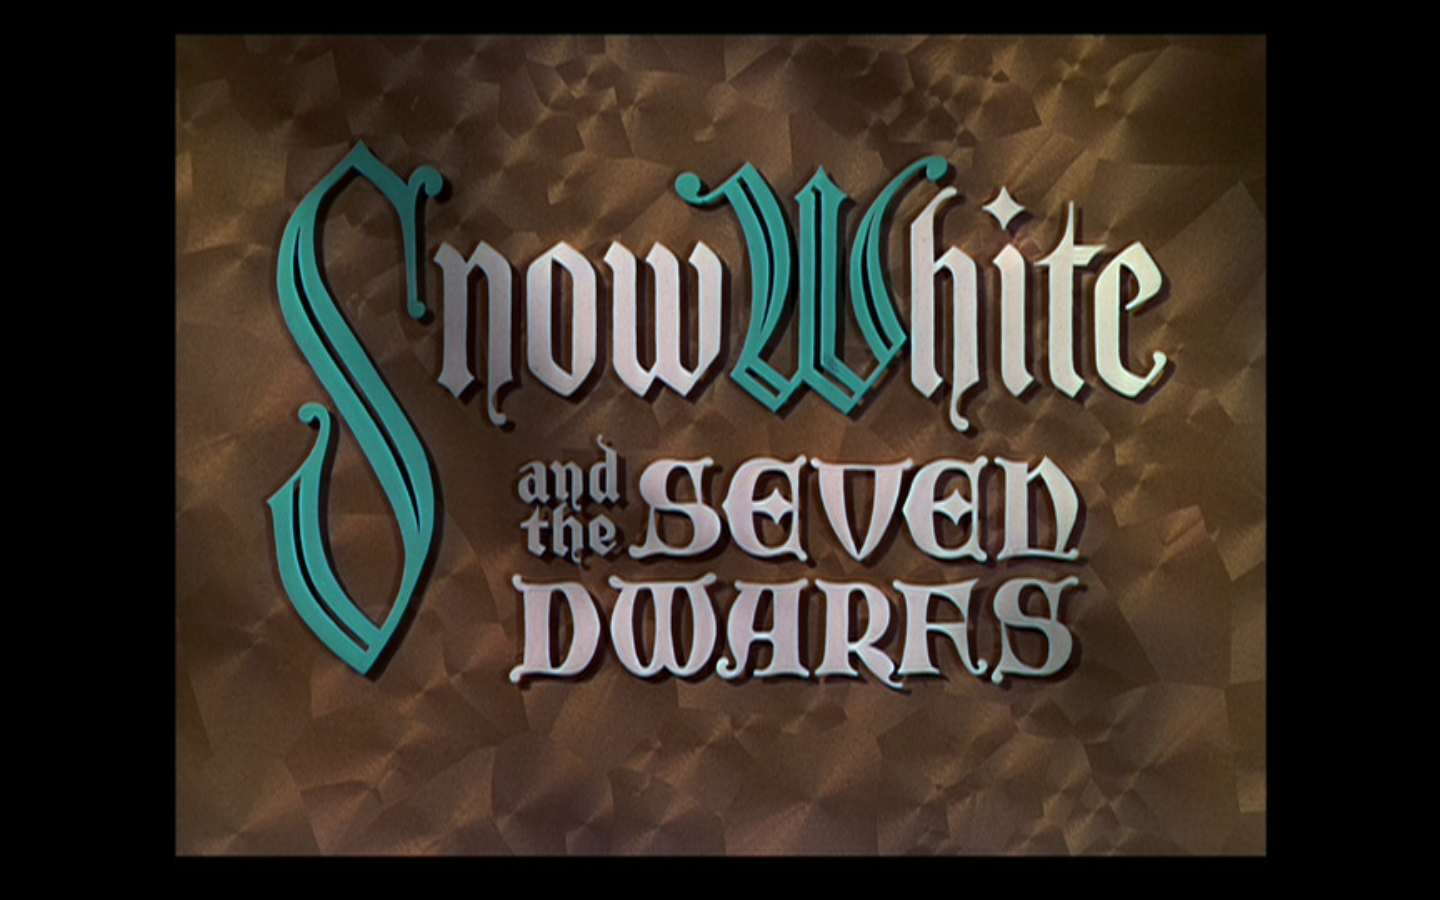 snow-white-and-the-seven-dwarfs-title-card.png